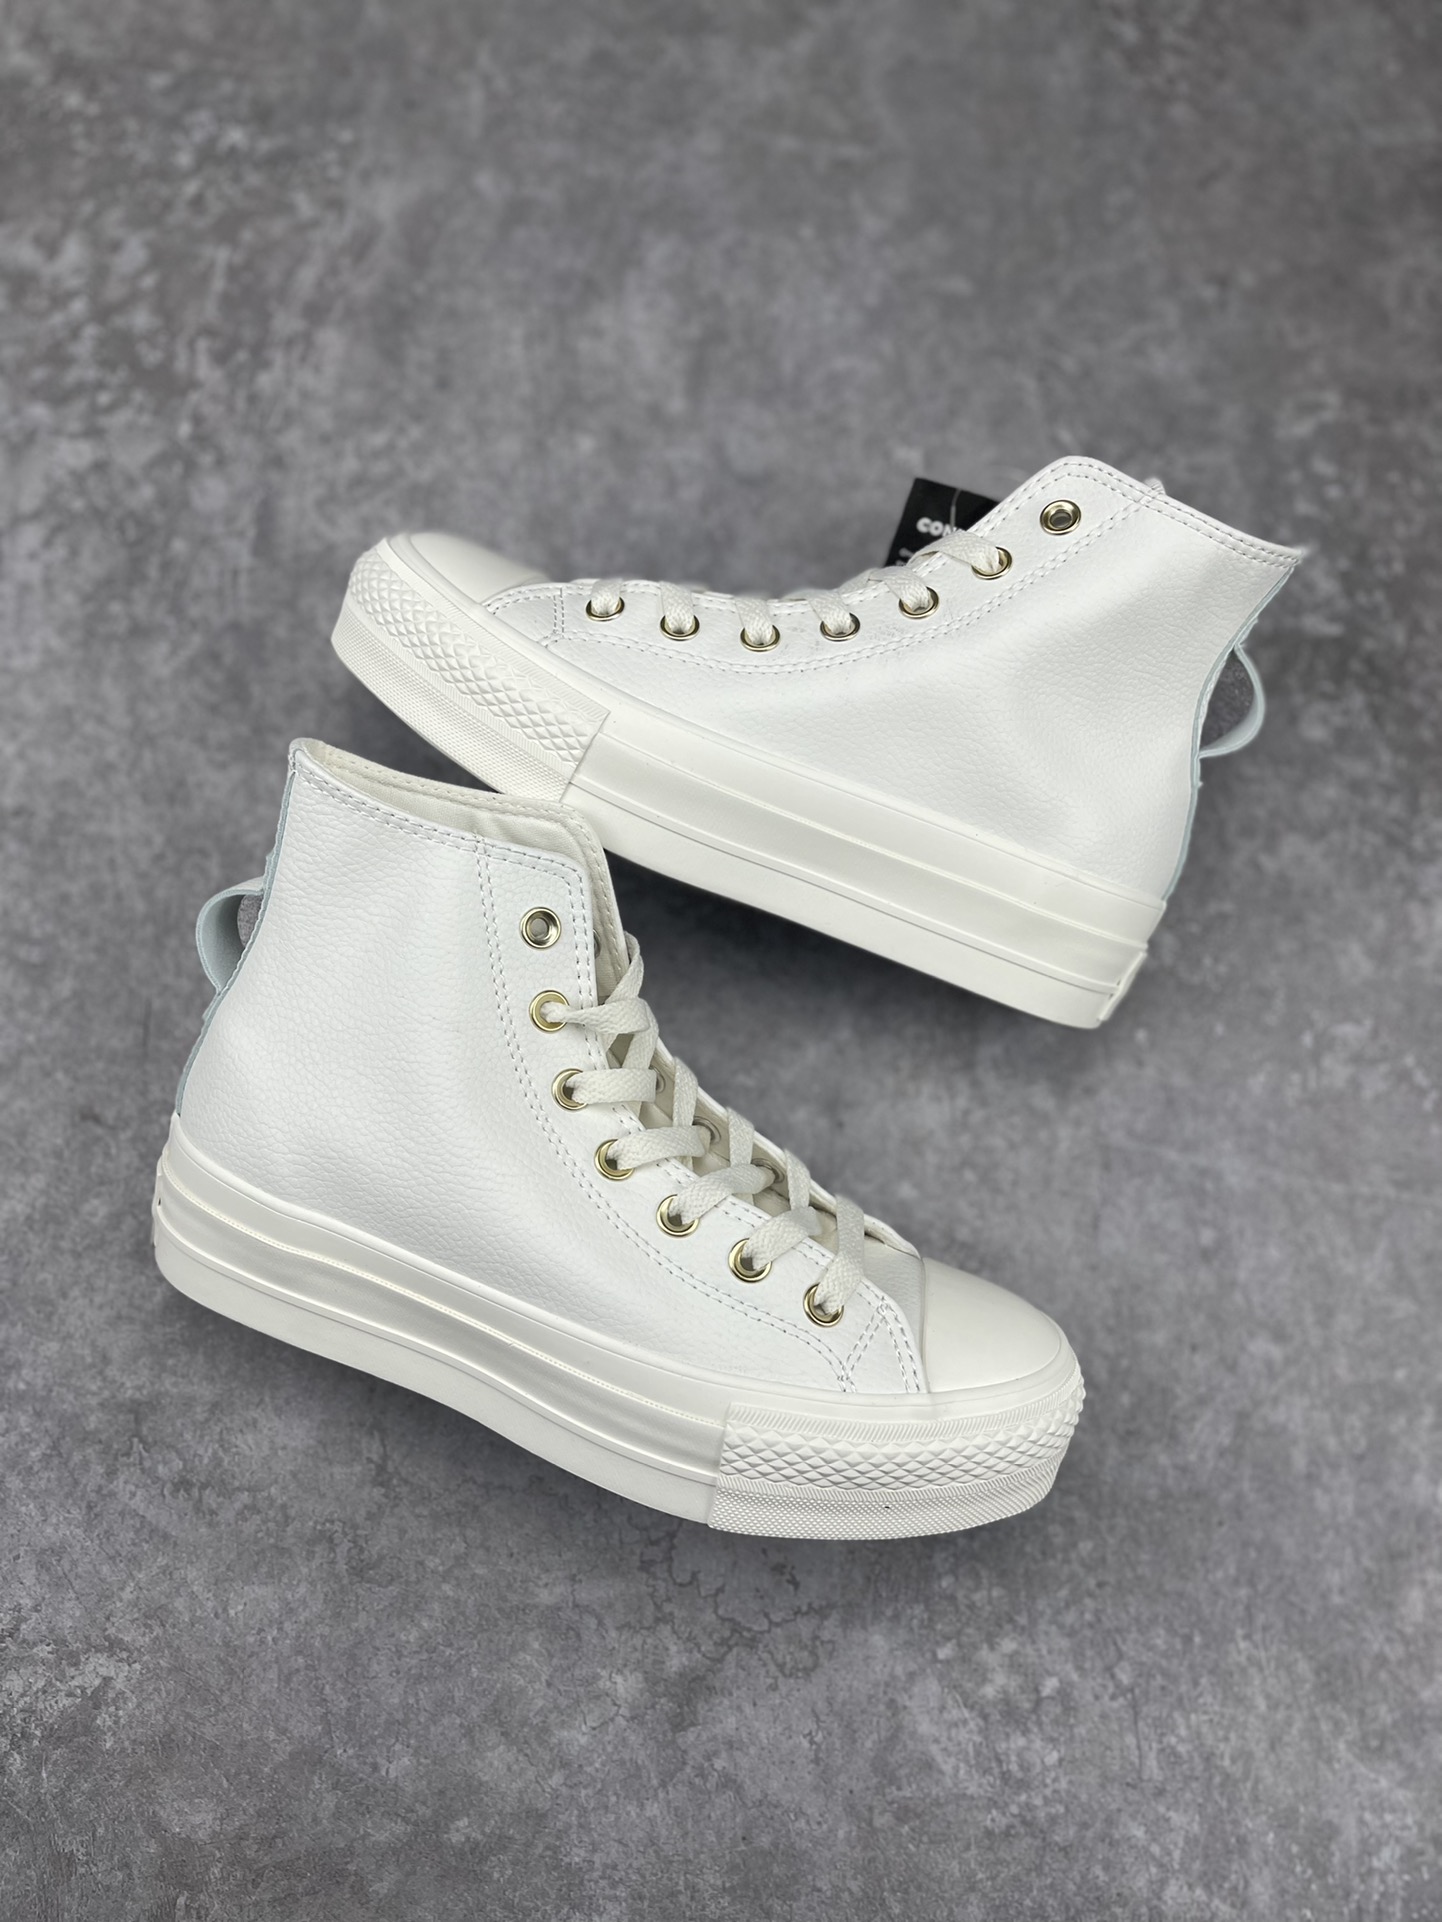 Chuck Taylor All Star Lift High Leather "Vanilla Platinum Foil" Star Classic Neutral Muffin Platform Leisure Sports Vulcanized Shoes "Leather Vanilla White Gold Foil" in Discount Promotion on Sale